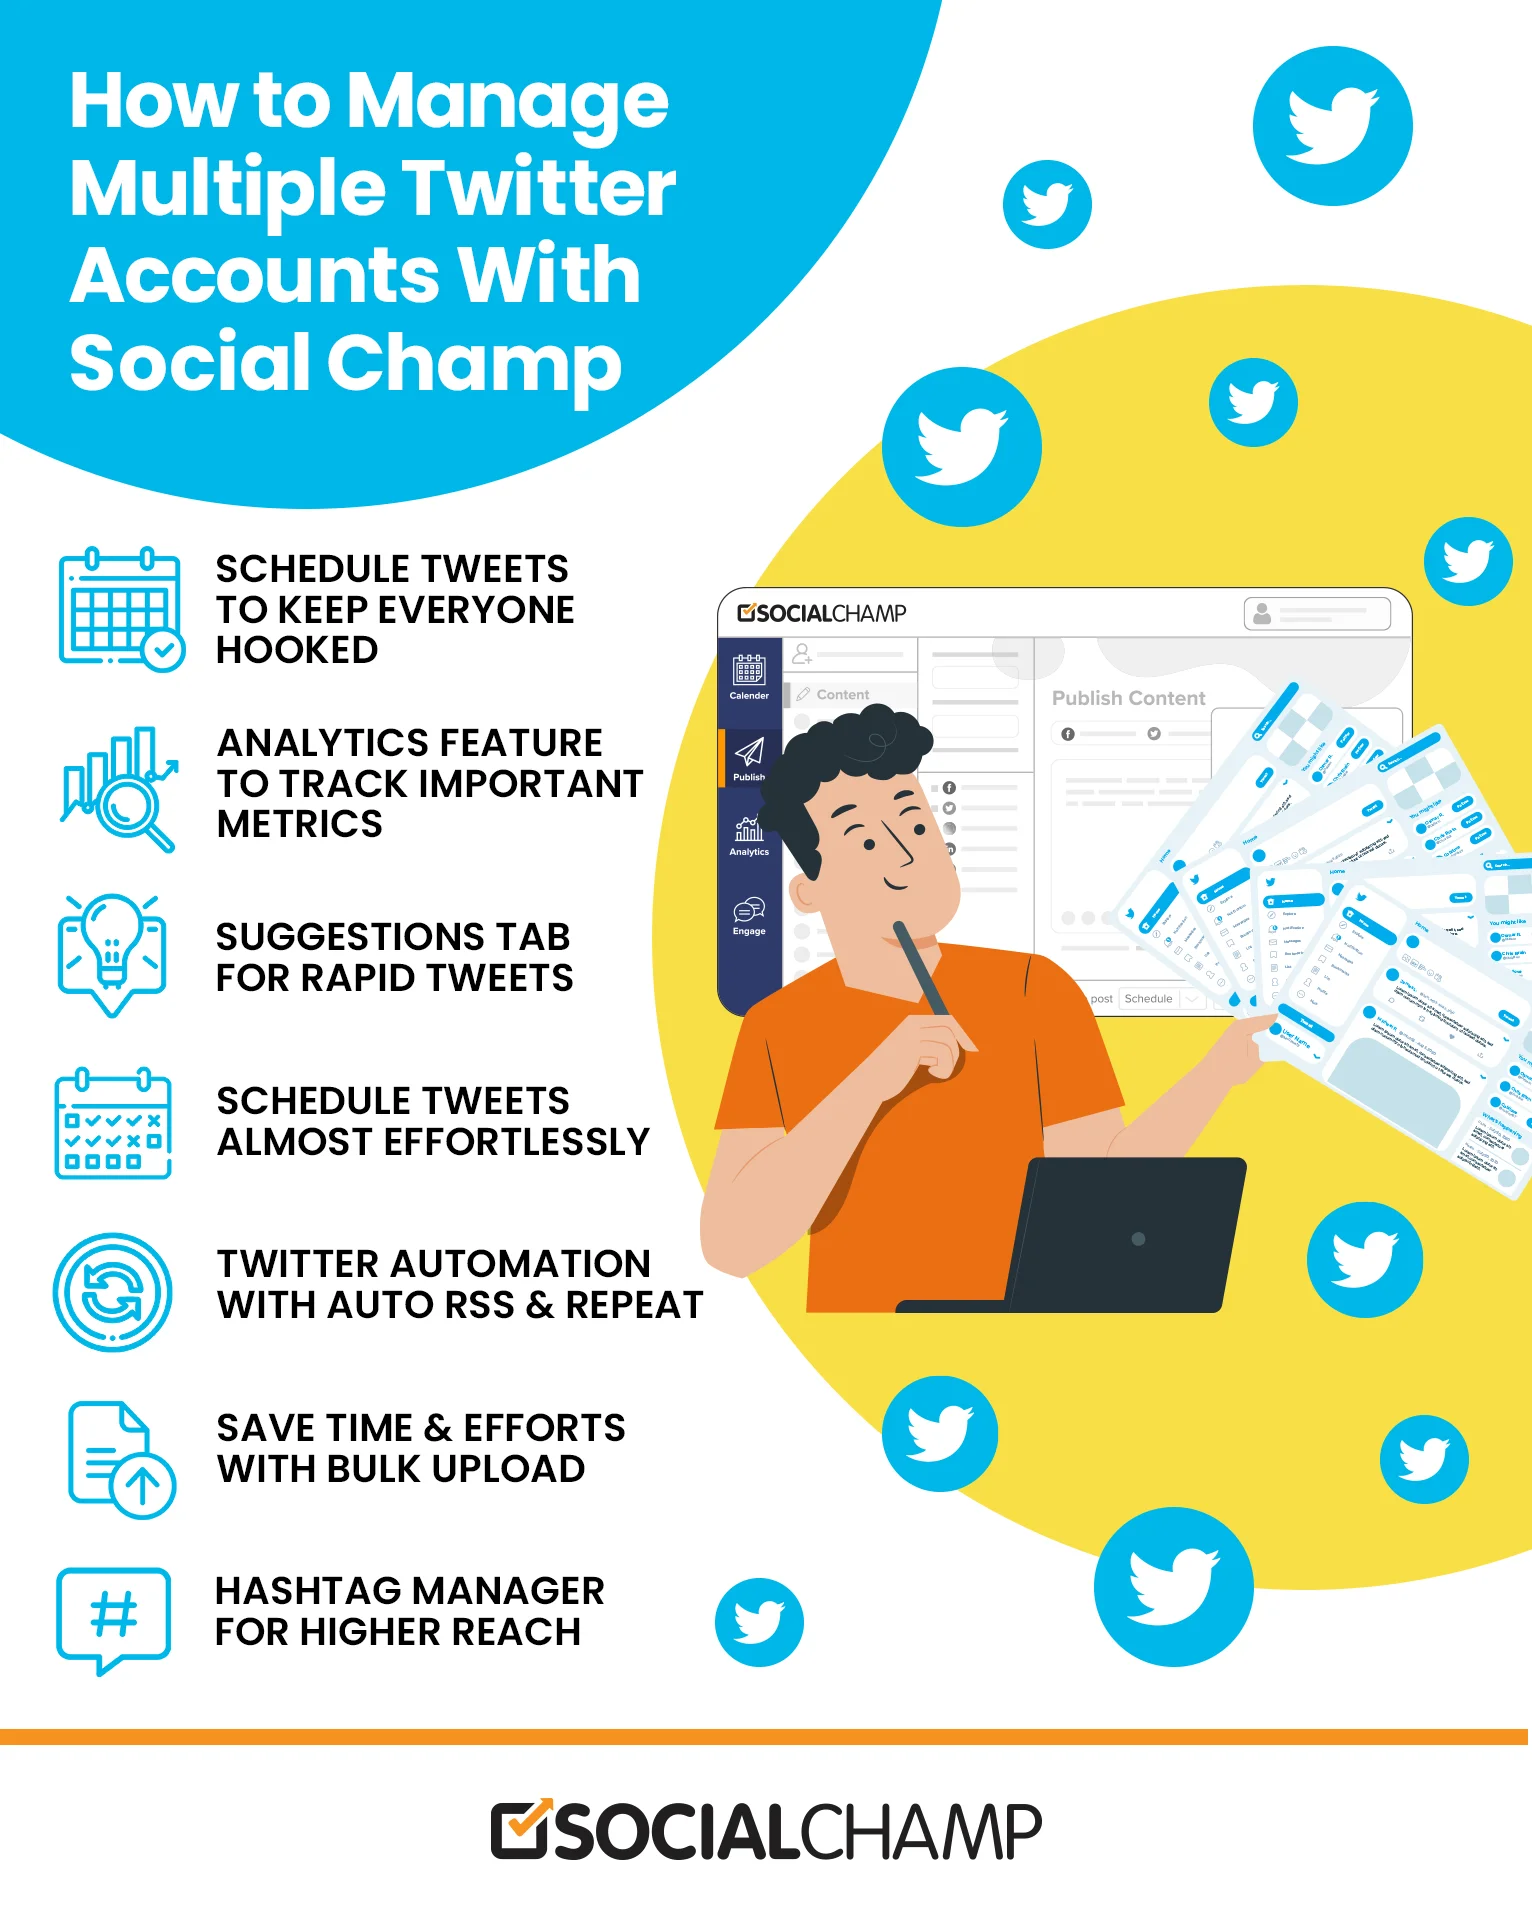 How to Create and Manage Multiple Twitter Accounts